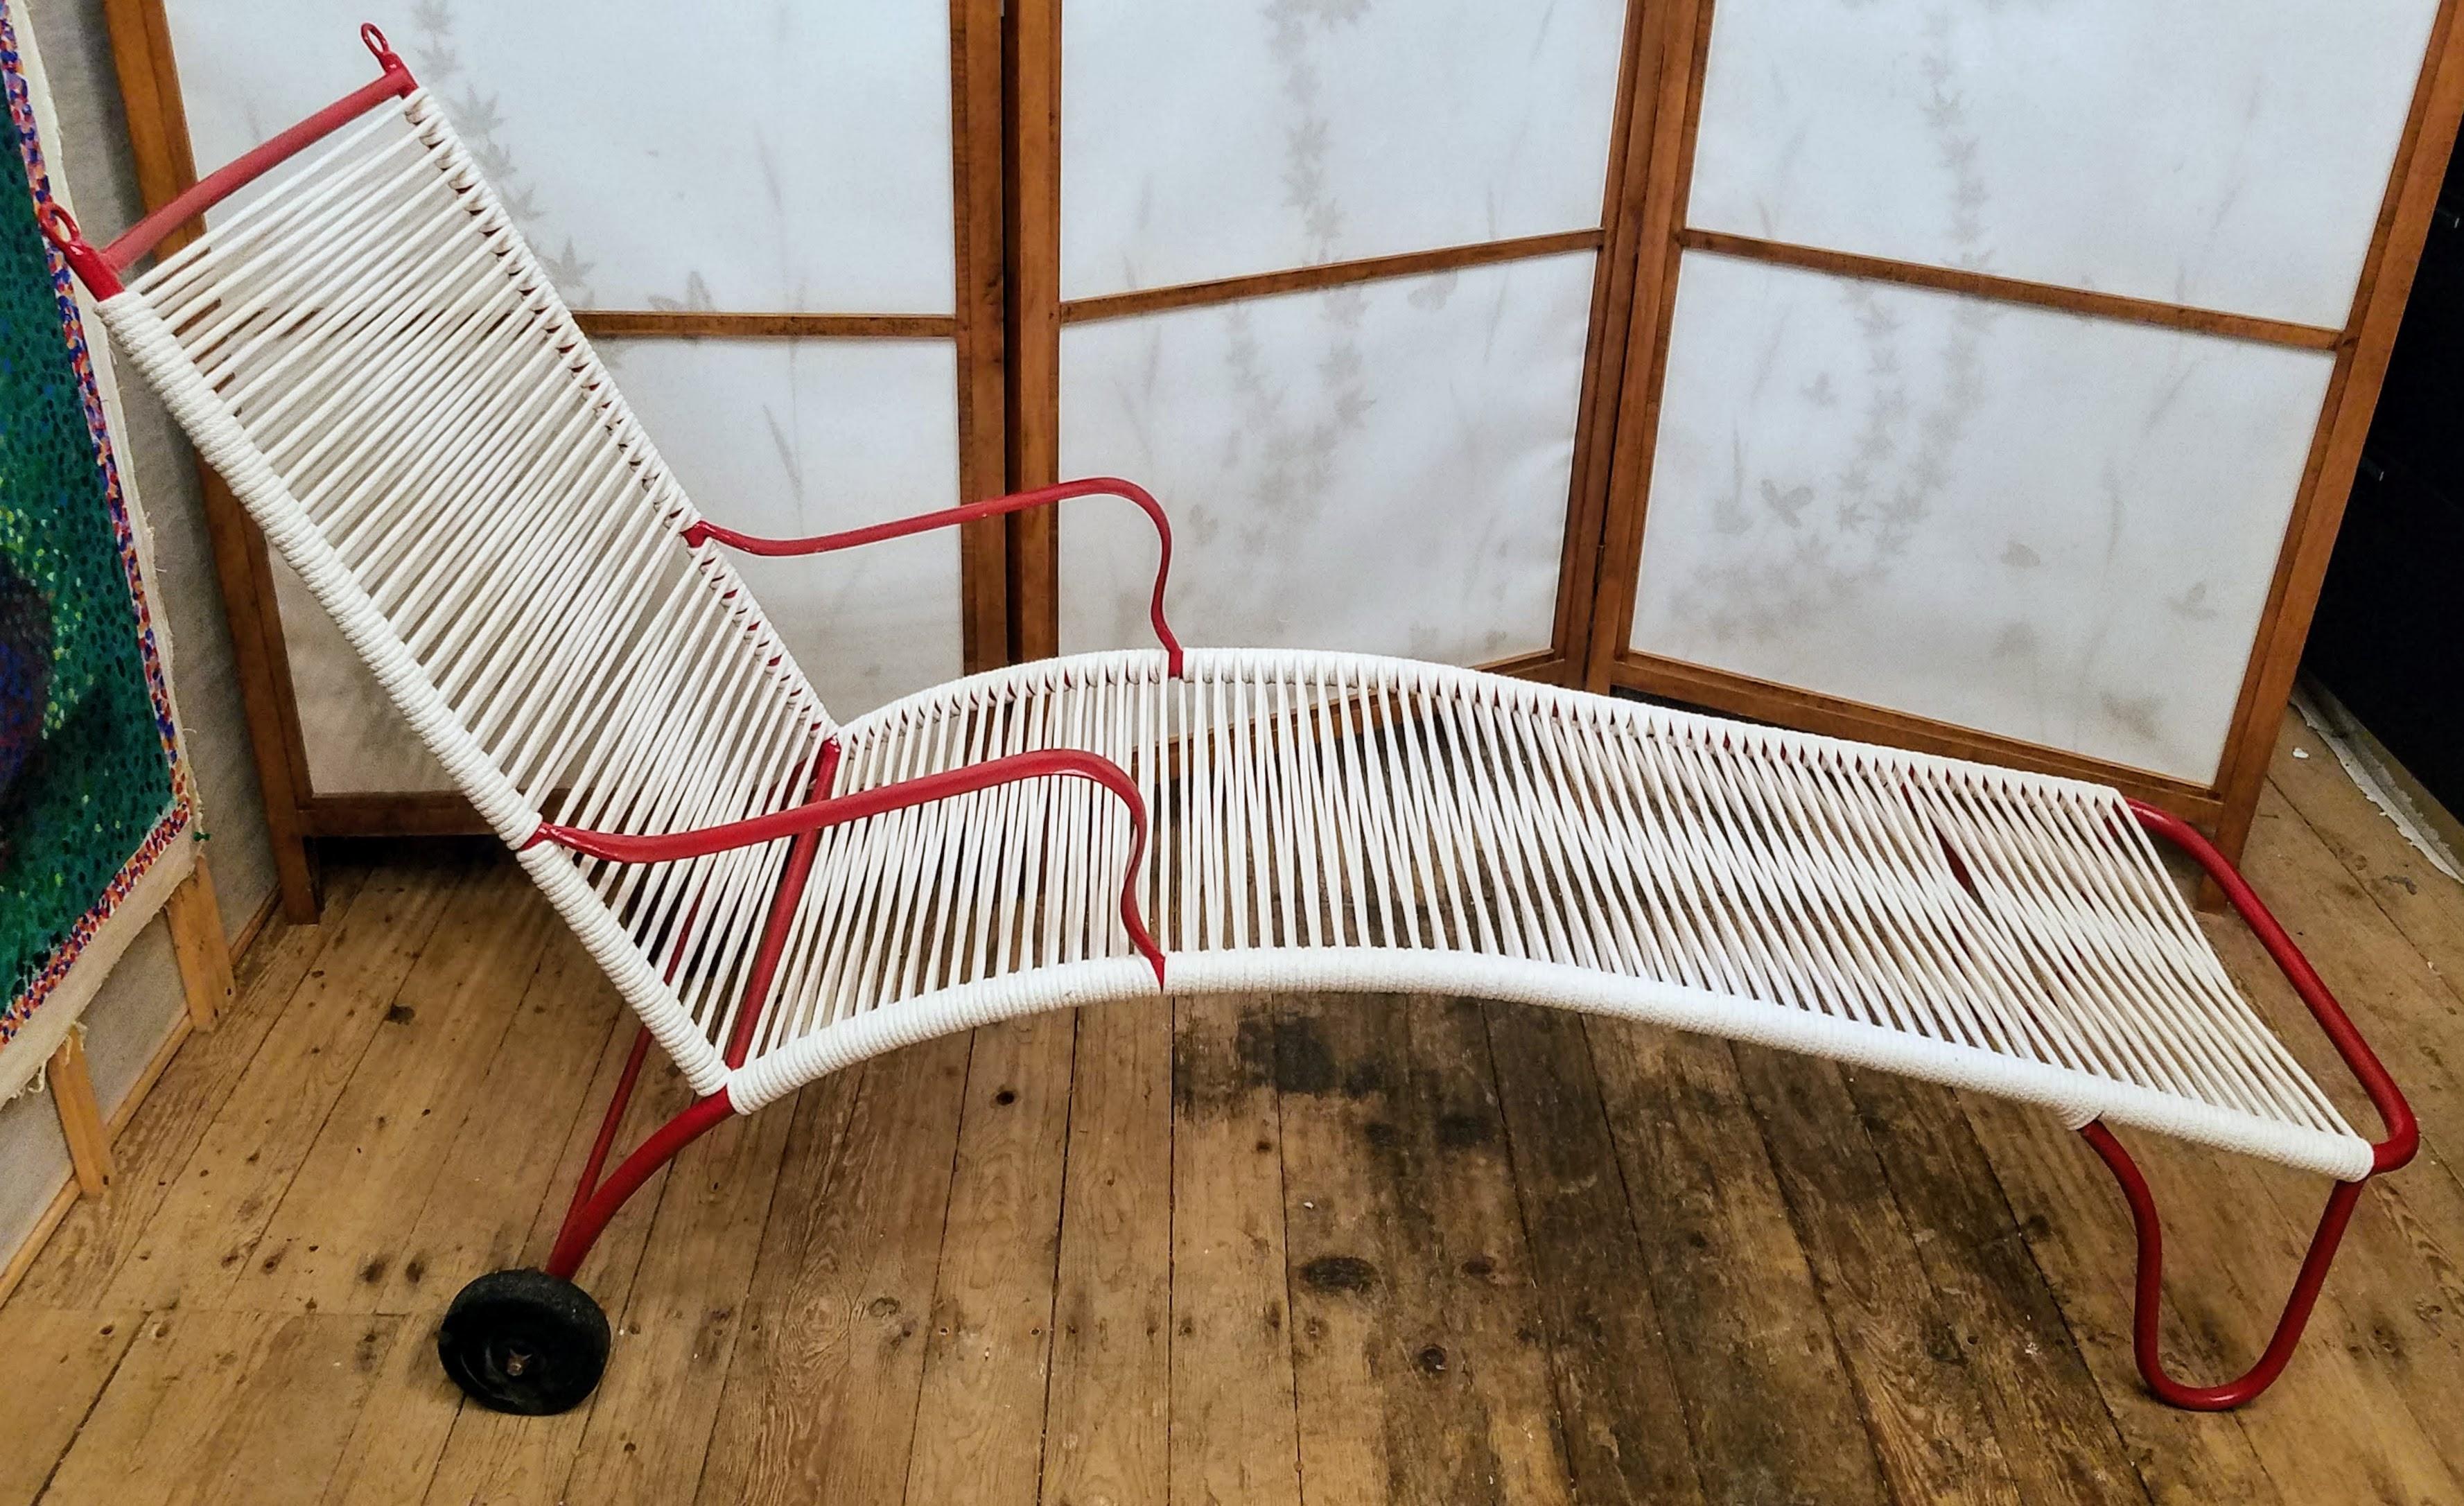 Robert Lewis Rolling Chaise Lounge Studio Crafted Santa Barbara, CA. 1930s In Good Condition For Sale In Camden, ME